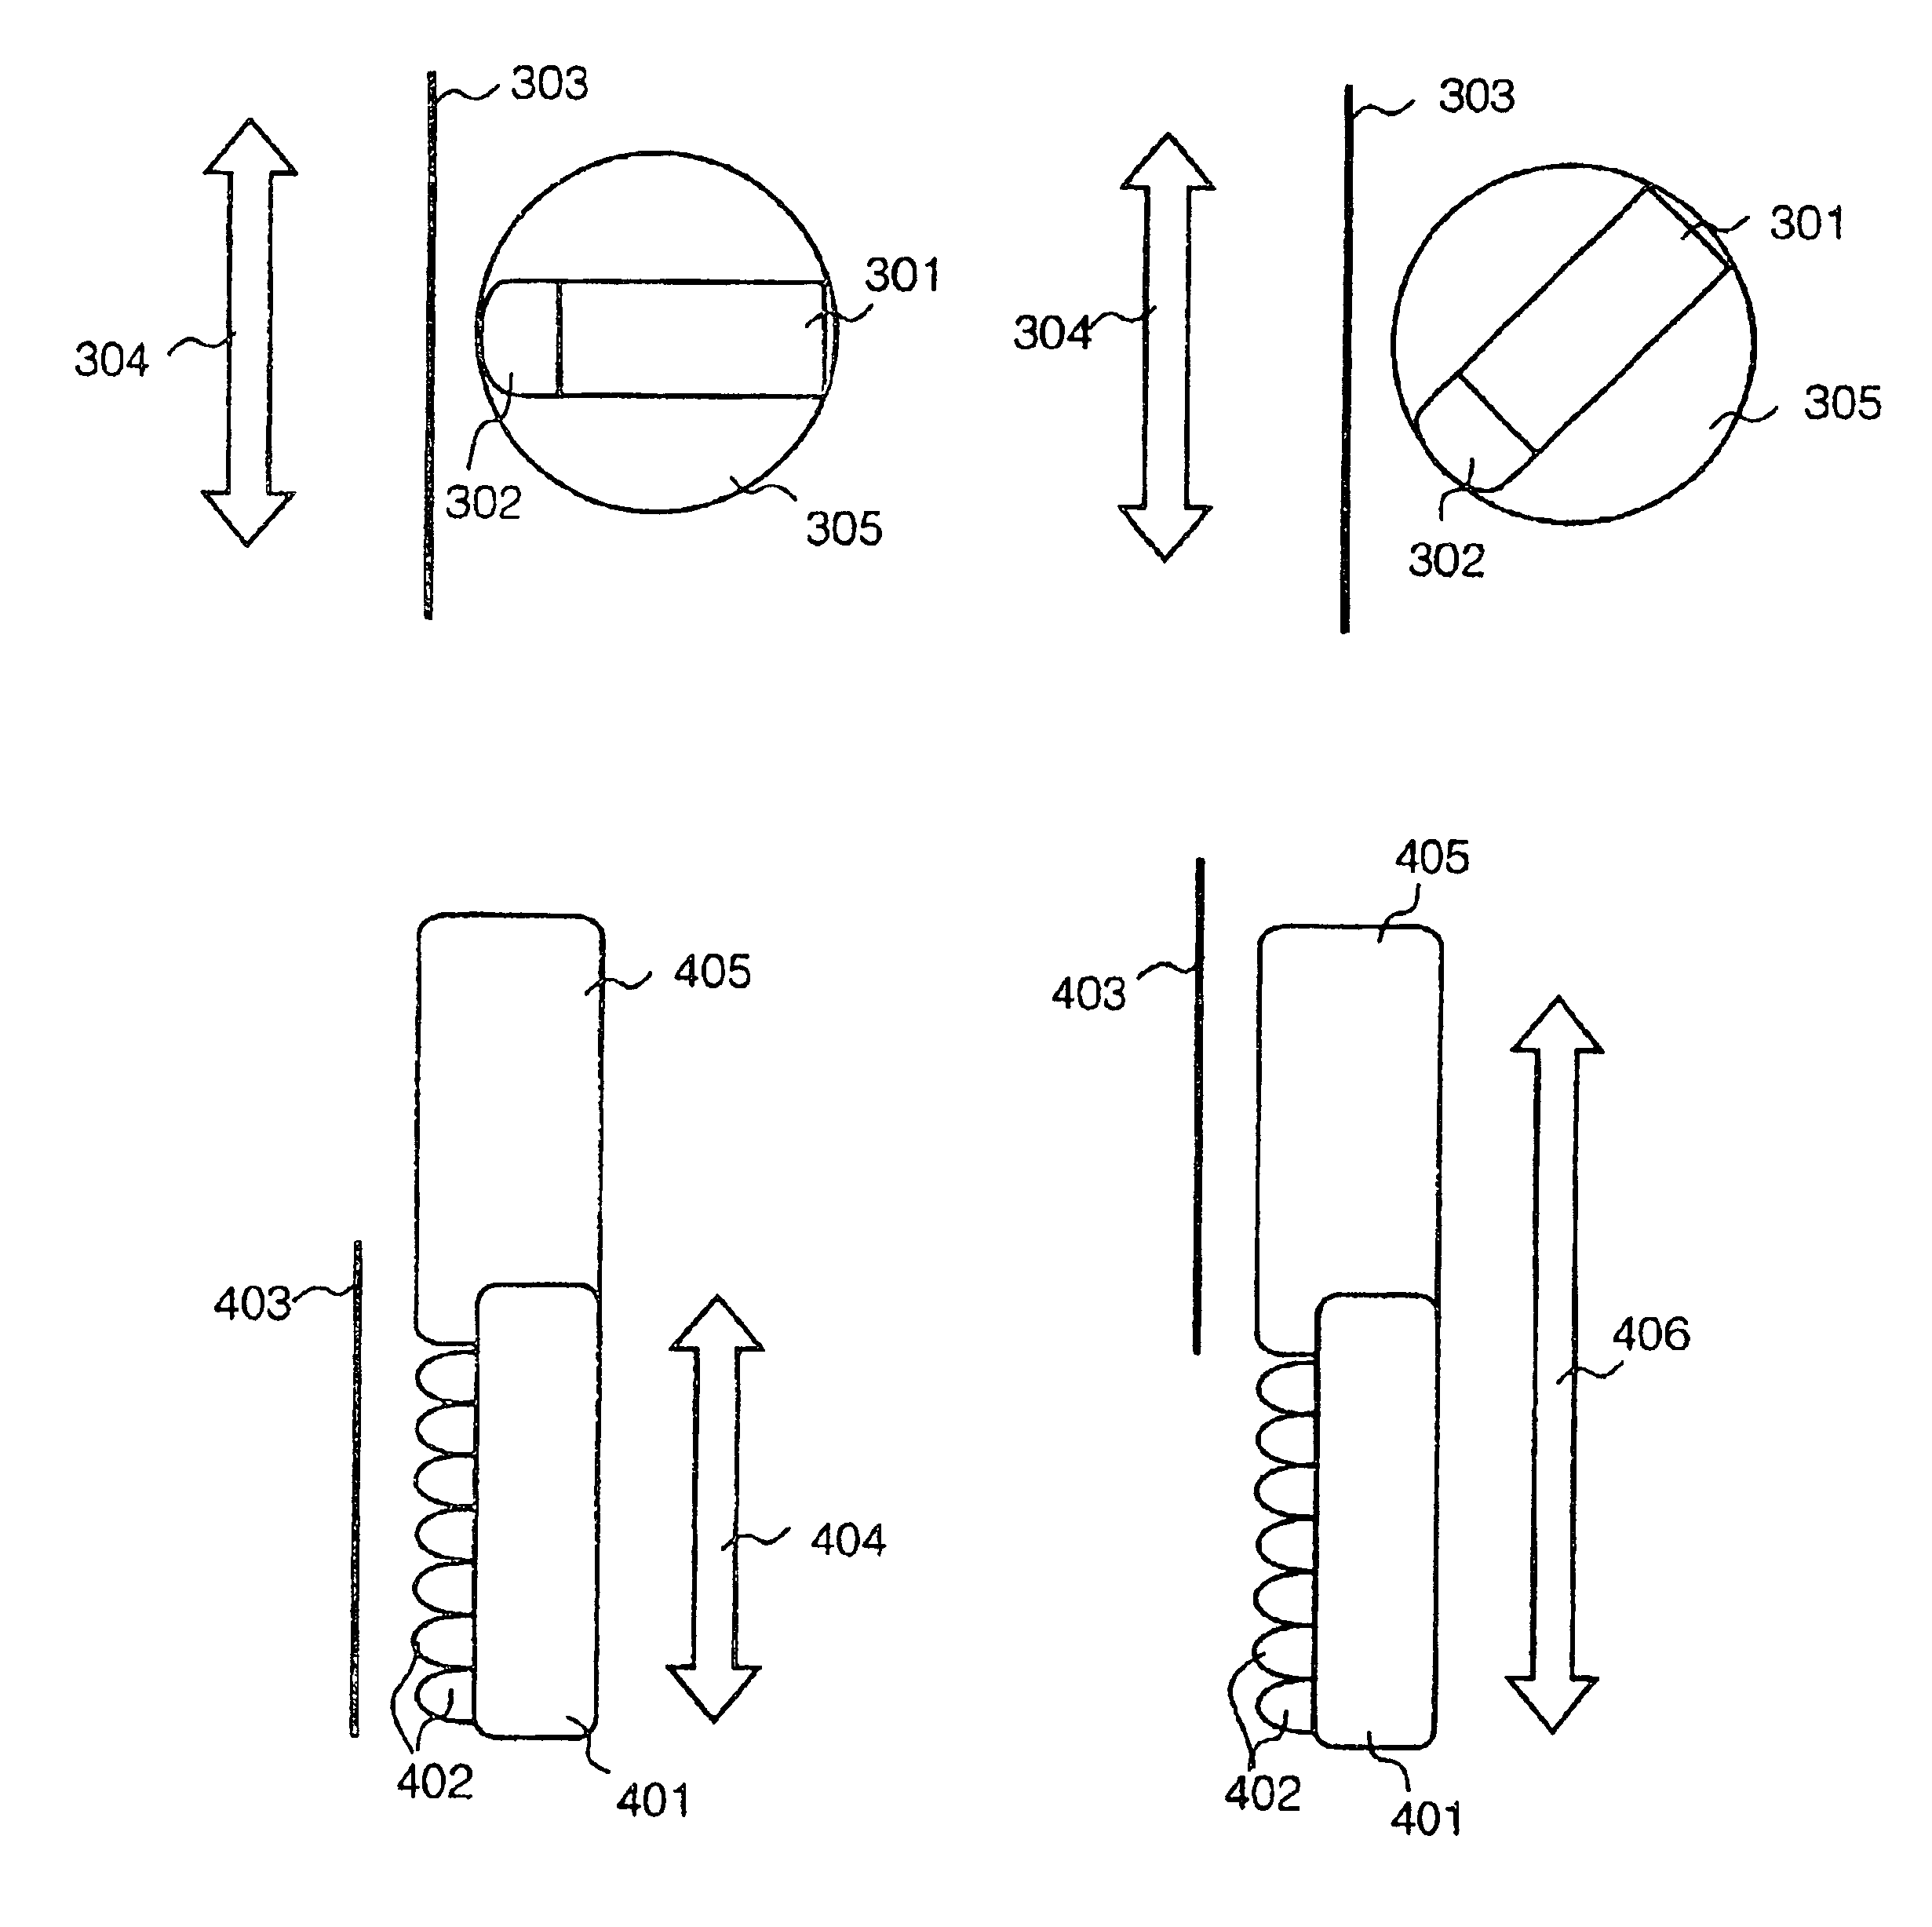 Method and apparatus for reducing read/write head wear while maintaining tape path and tension during search mode